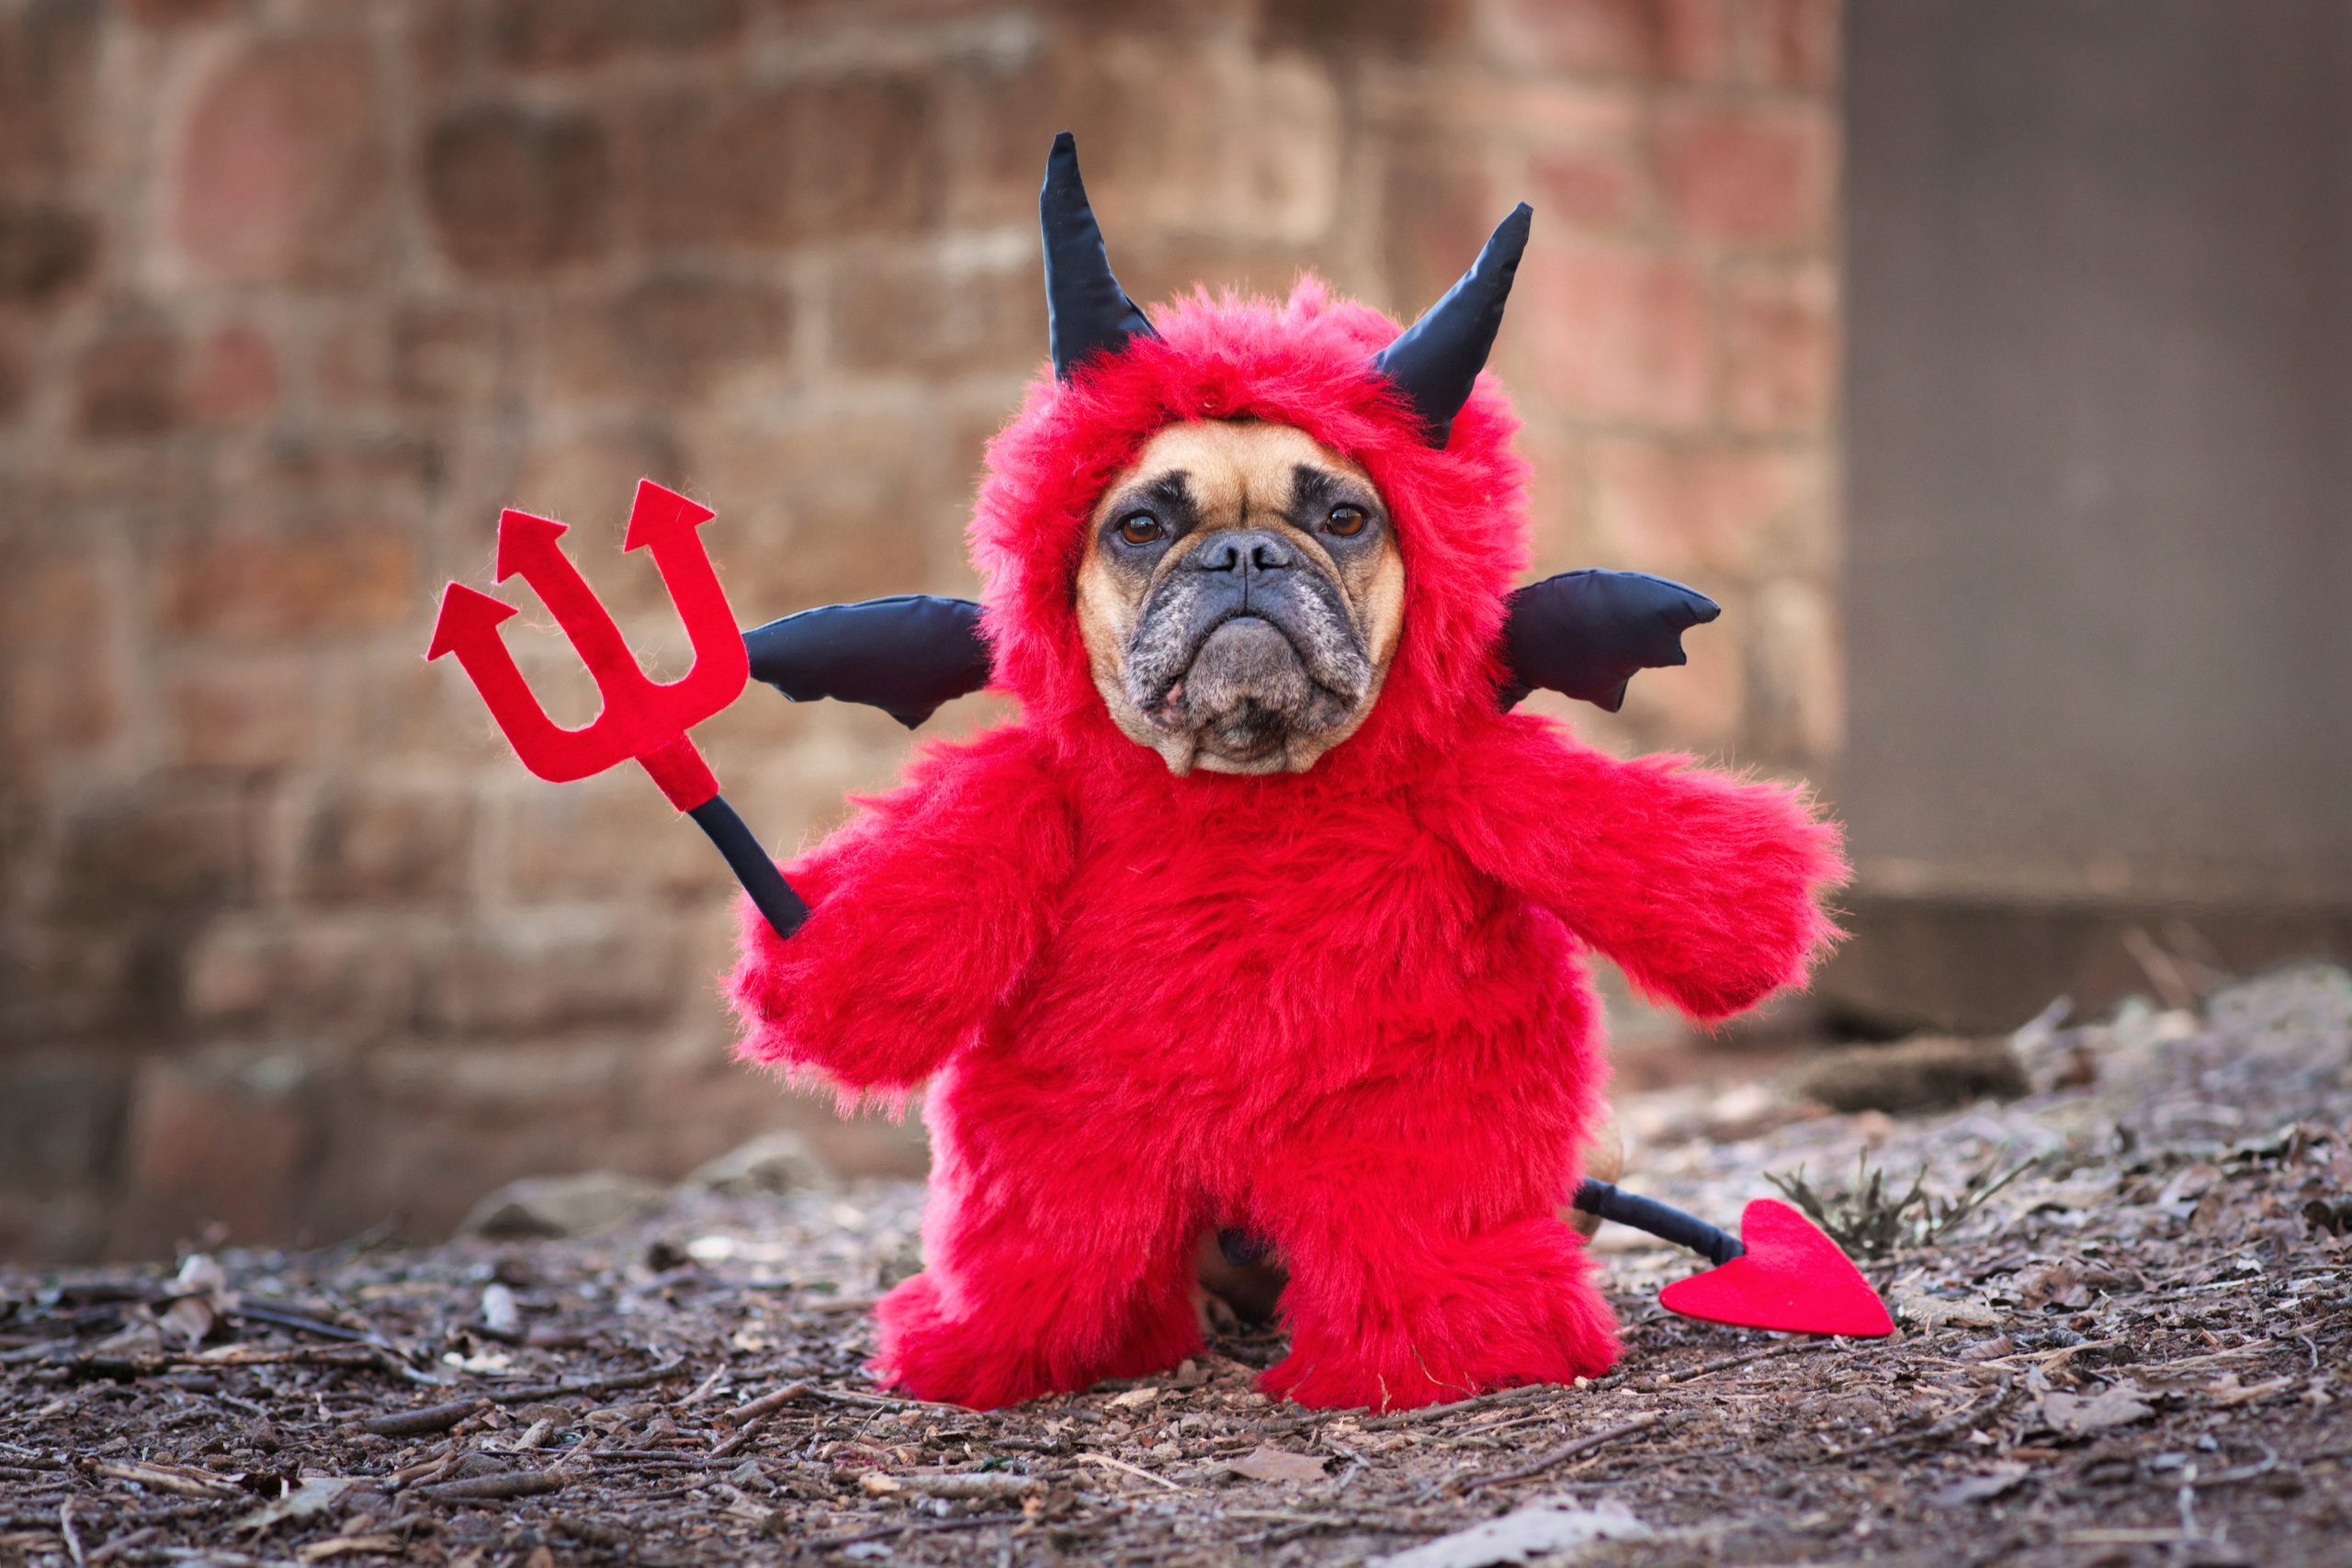 French Bulldog dog in red devil Halloween costume with pitchfork and horns